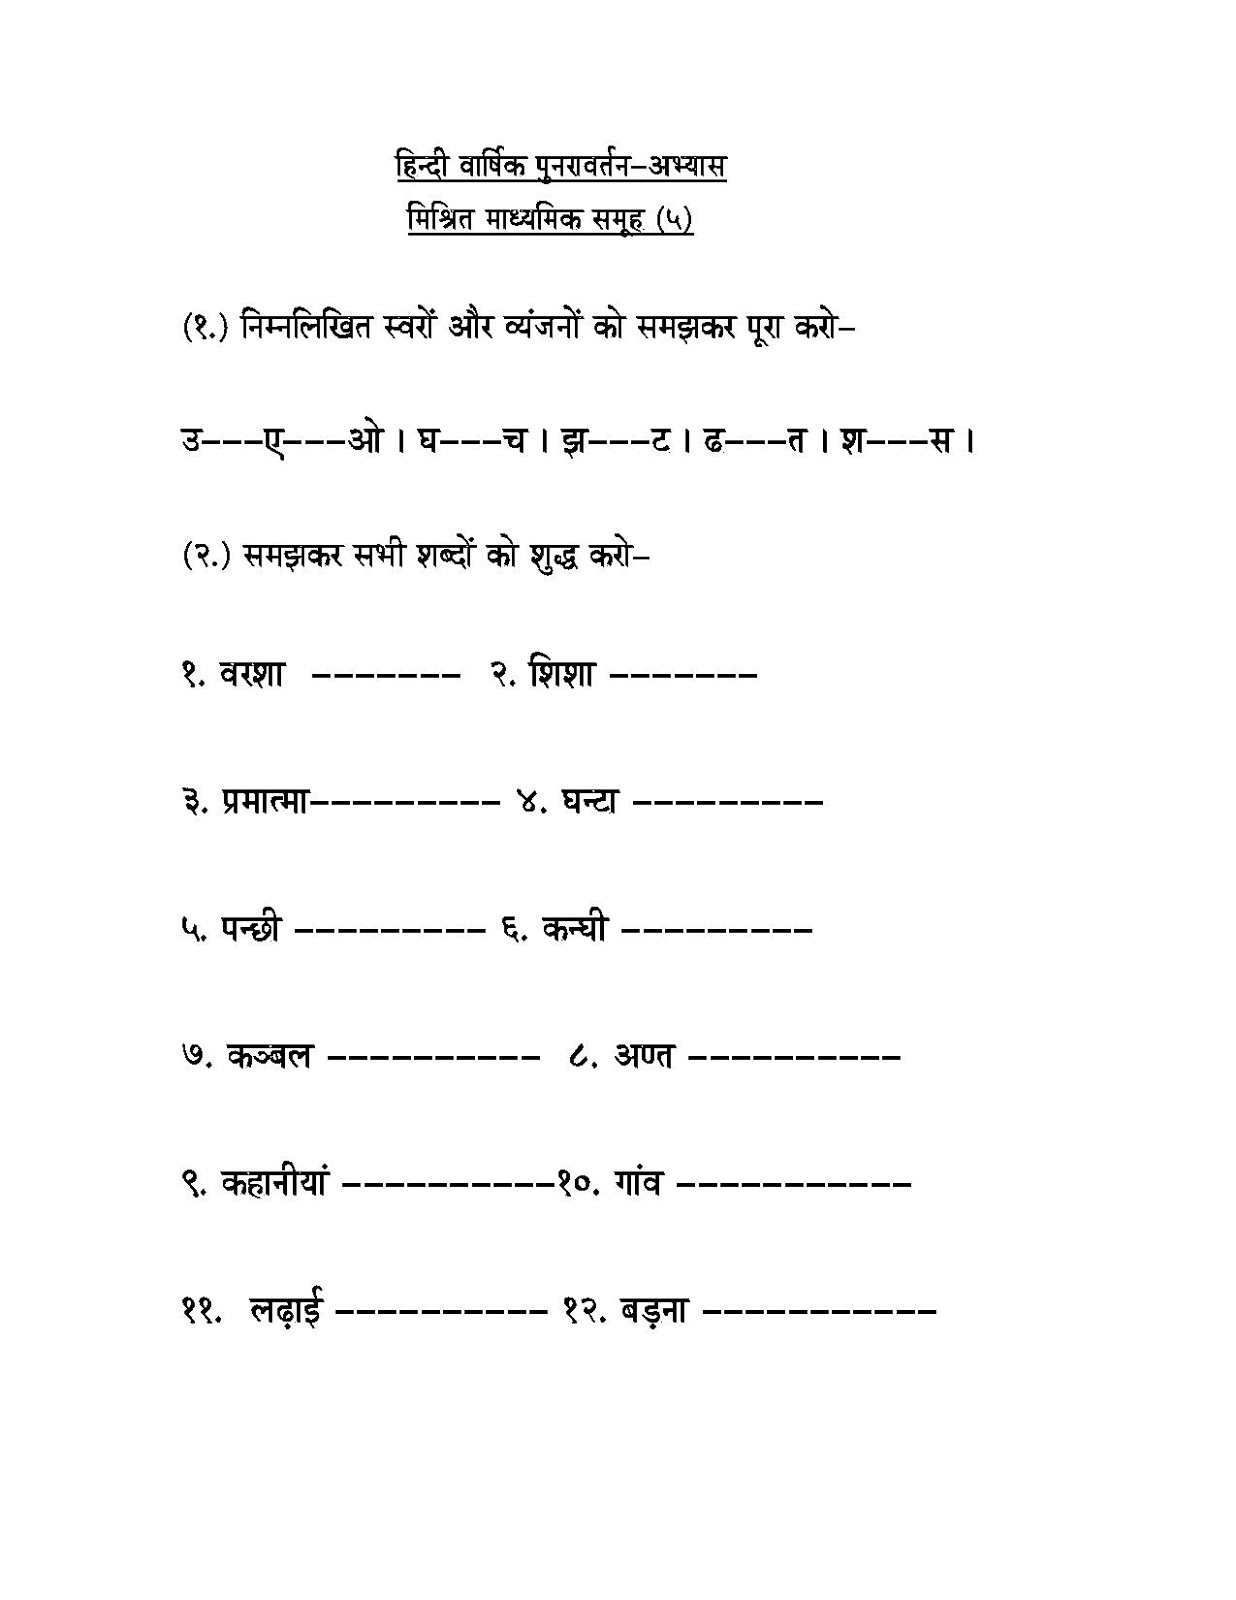 5th-grade-hindi-grammar-worksheets-for-class-5-with-answers-tutore